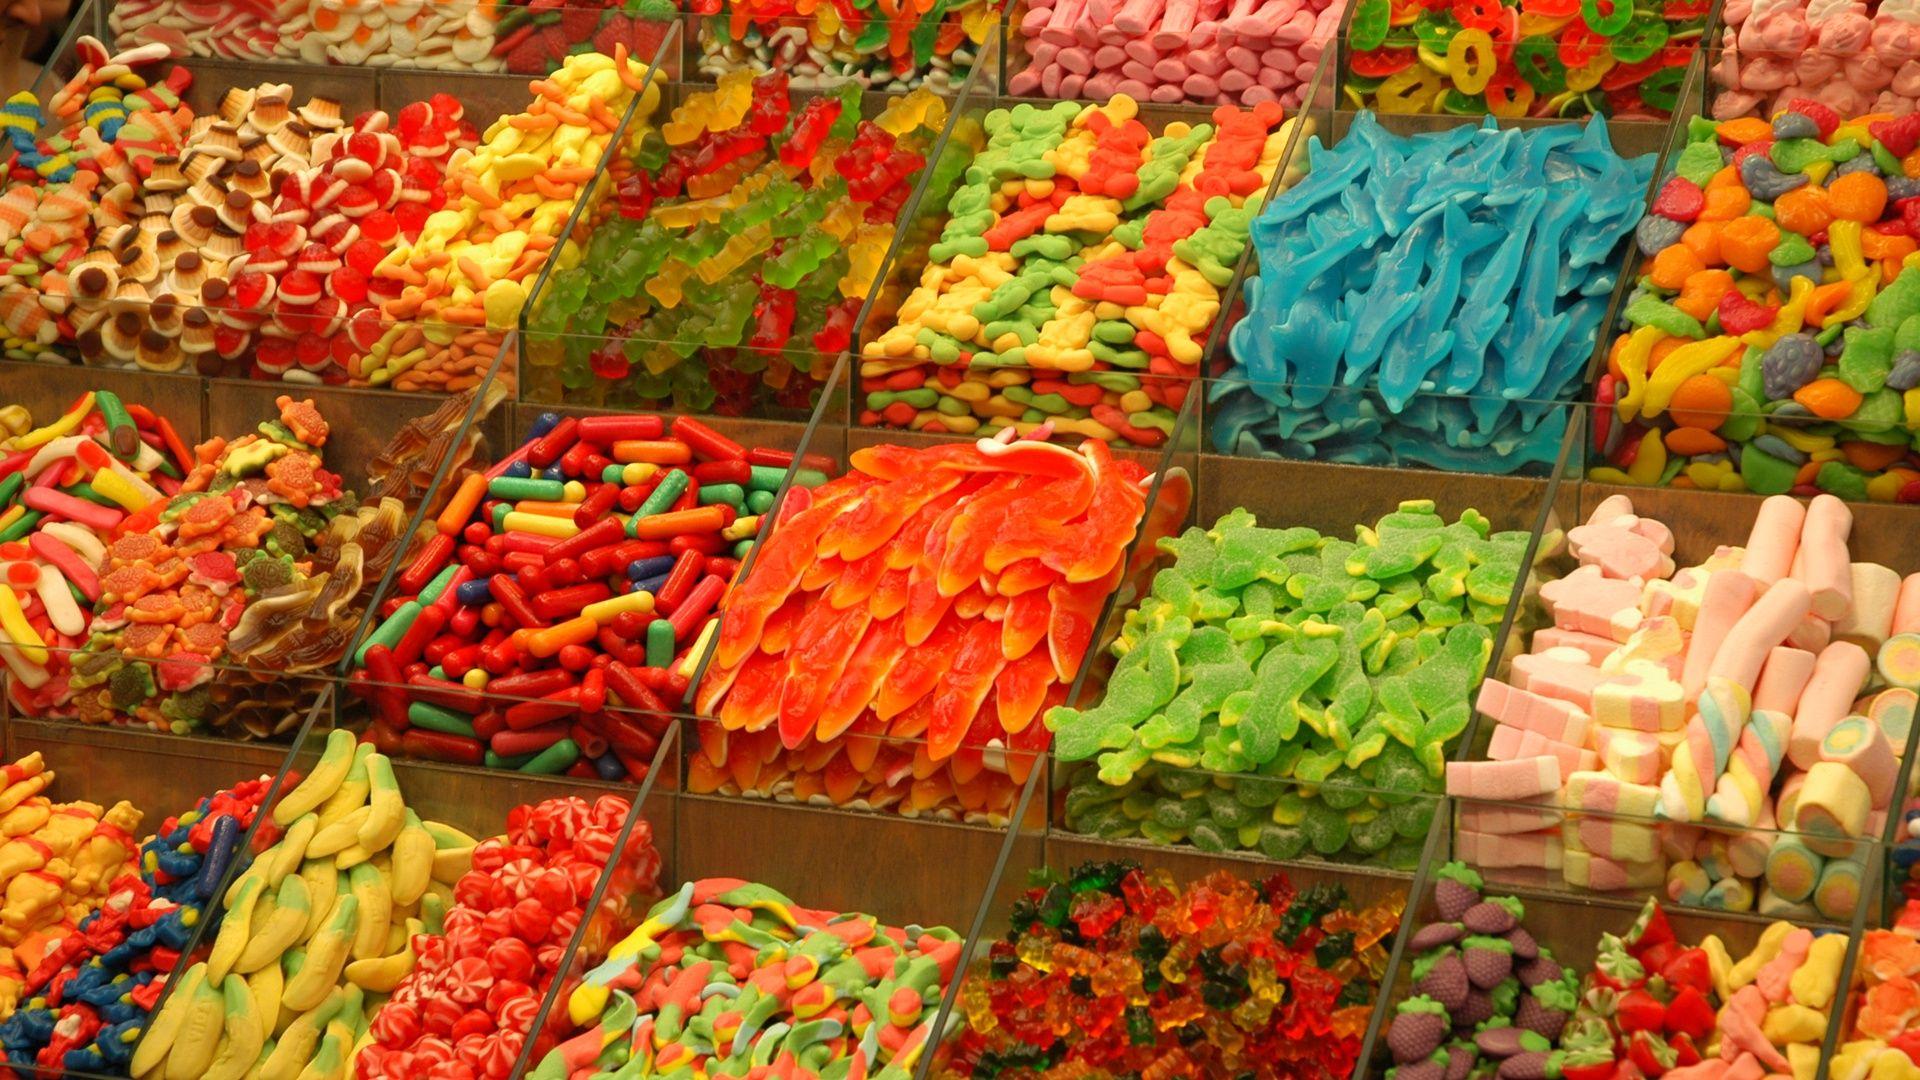 Candy Worms Wallpaper Background 59013 2496x1664 px